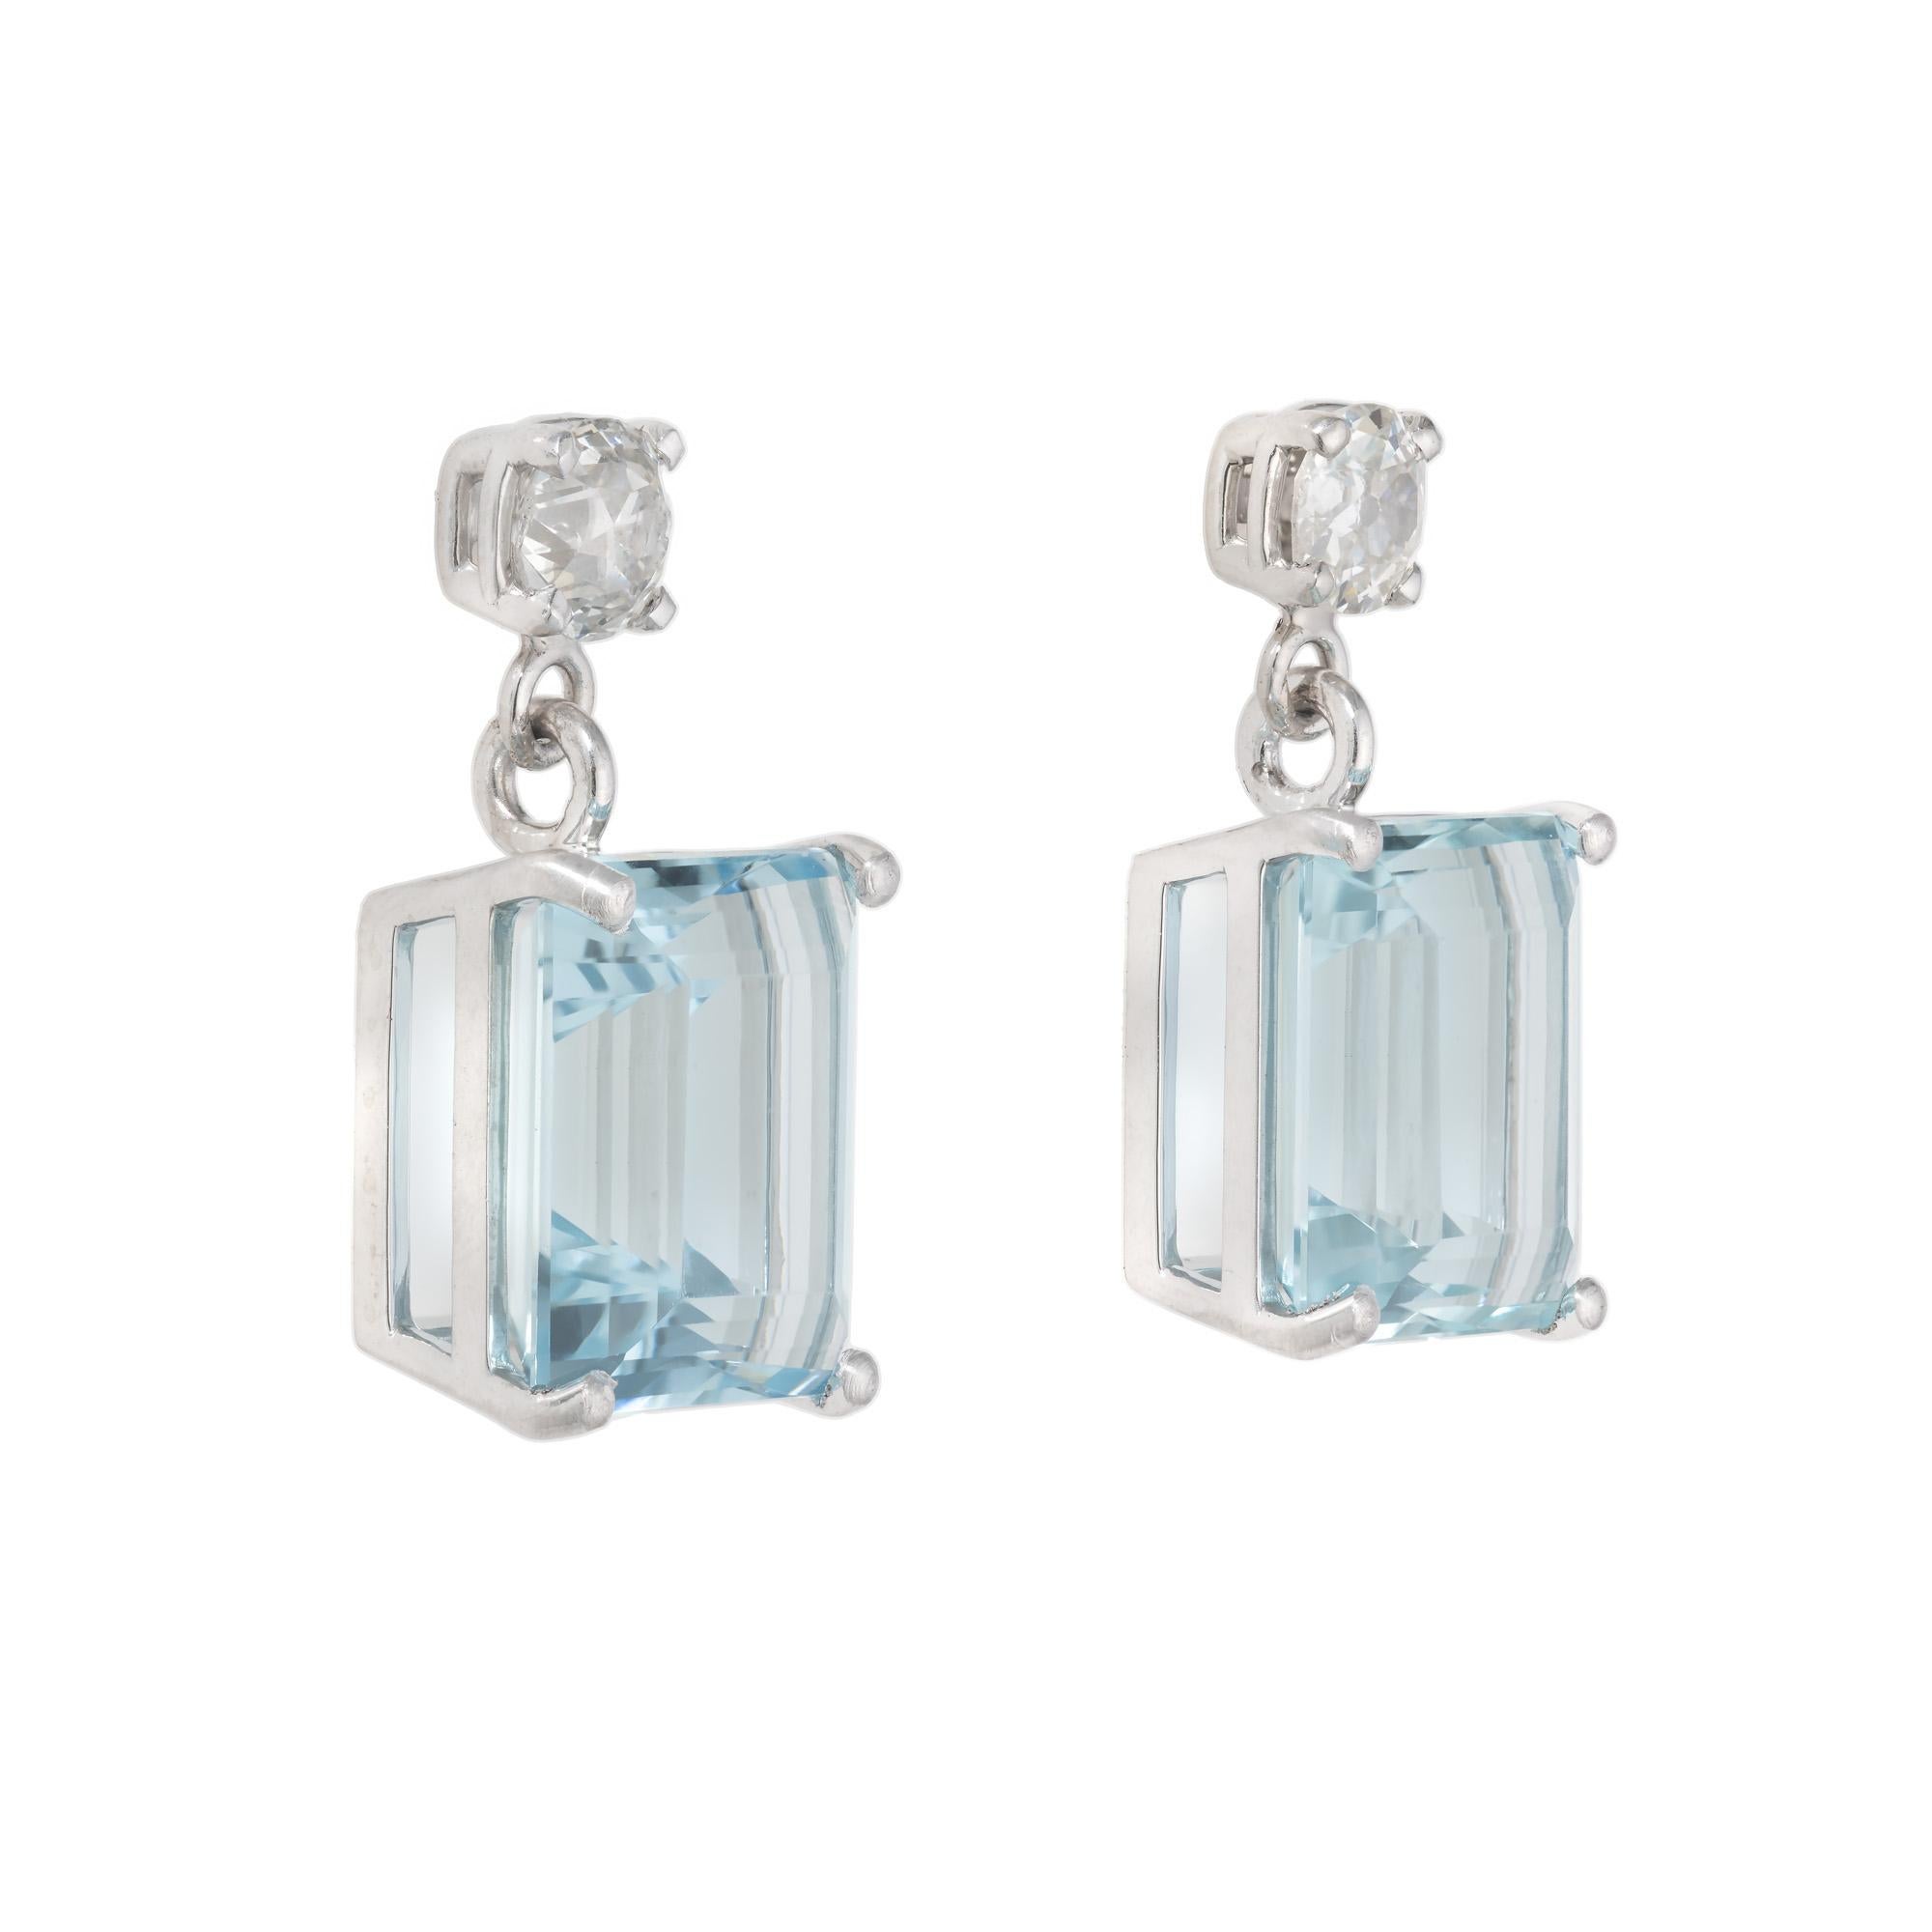 Platinum diamond aqua dangle earrings. Two natural untreated emerald cut aquamarines totaling 11.32cts set in  4 prong platinum settings. Each aqua is accented by one old mine cut diamond with both dating back to the 1900's. The aquas have a rich